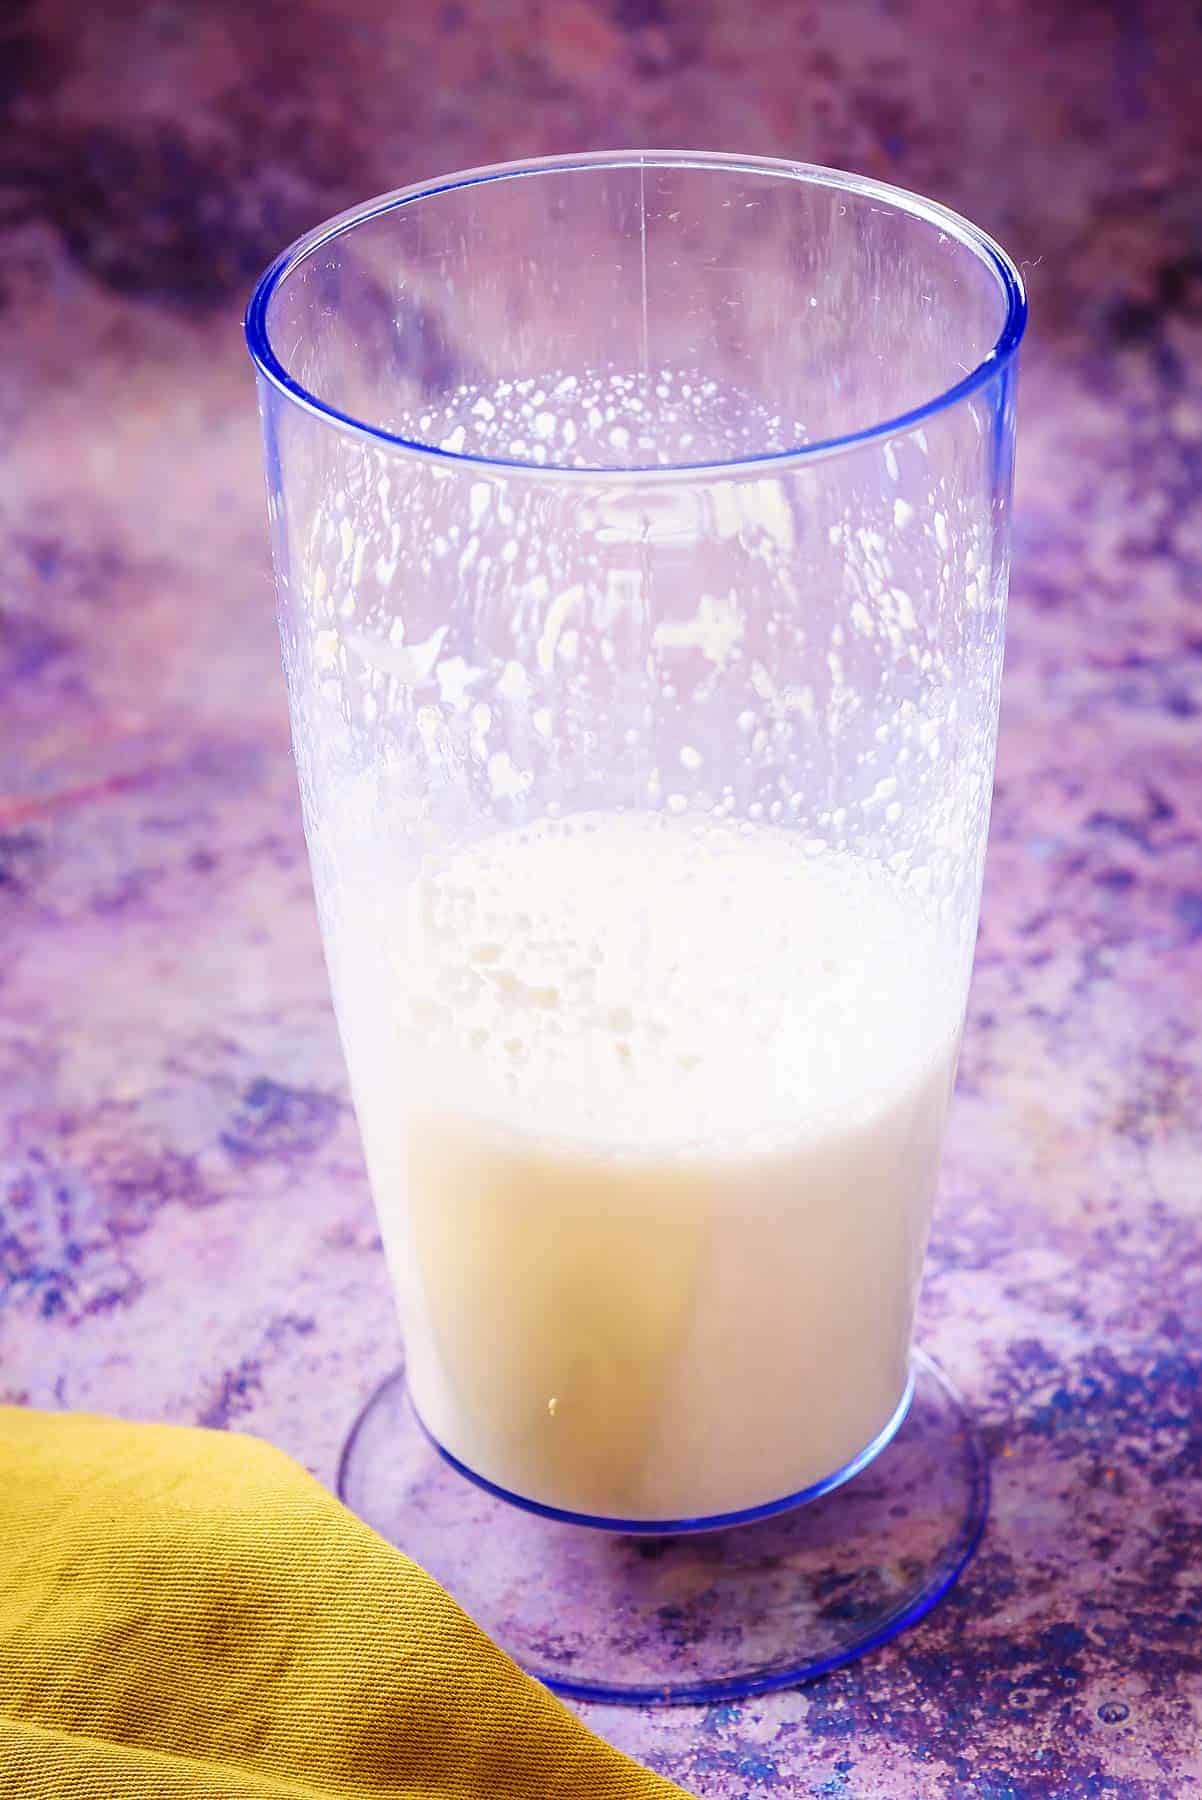 Blended cashew nuts and soya milk